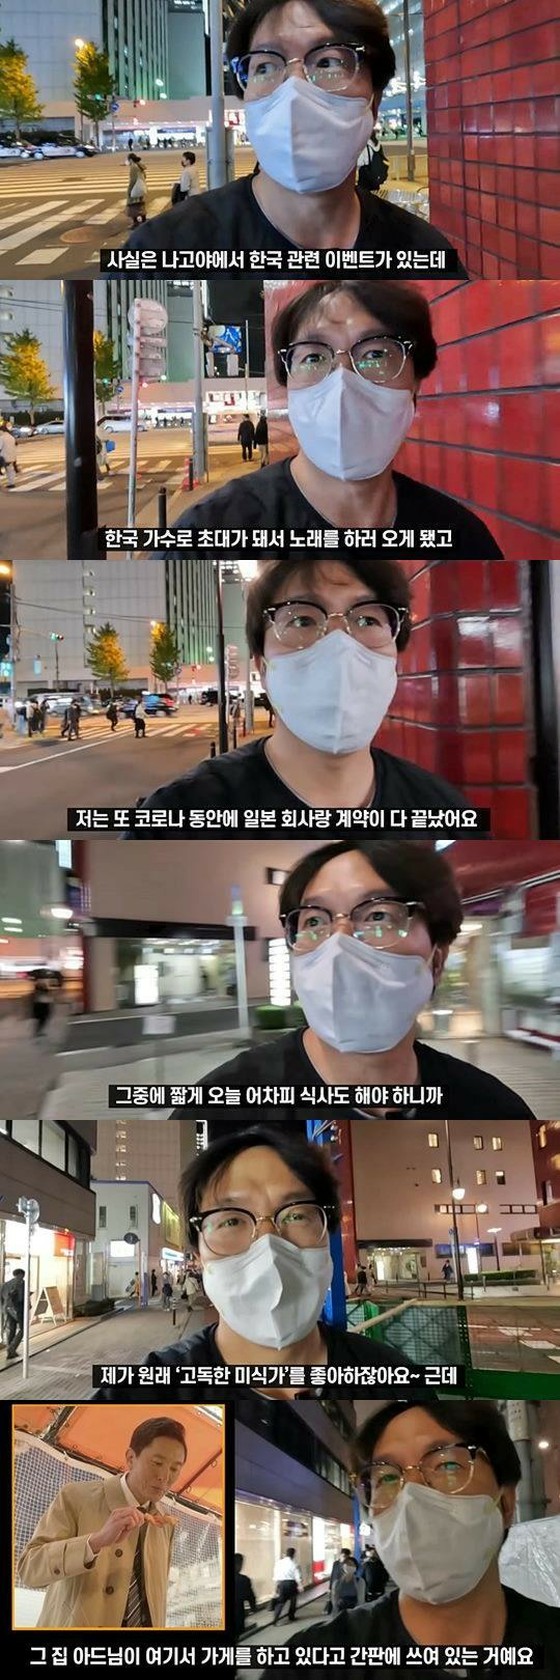 Singer Sung Si Kyung goes to Japan to find a company... "The contract ended during Corona"